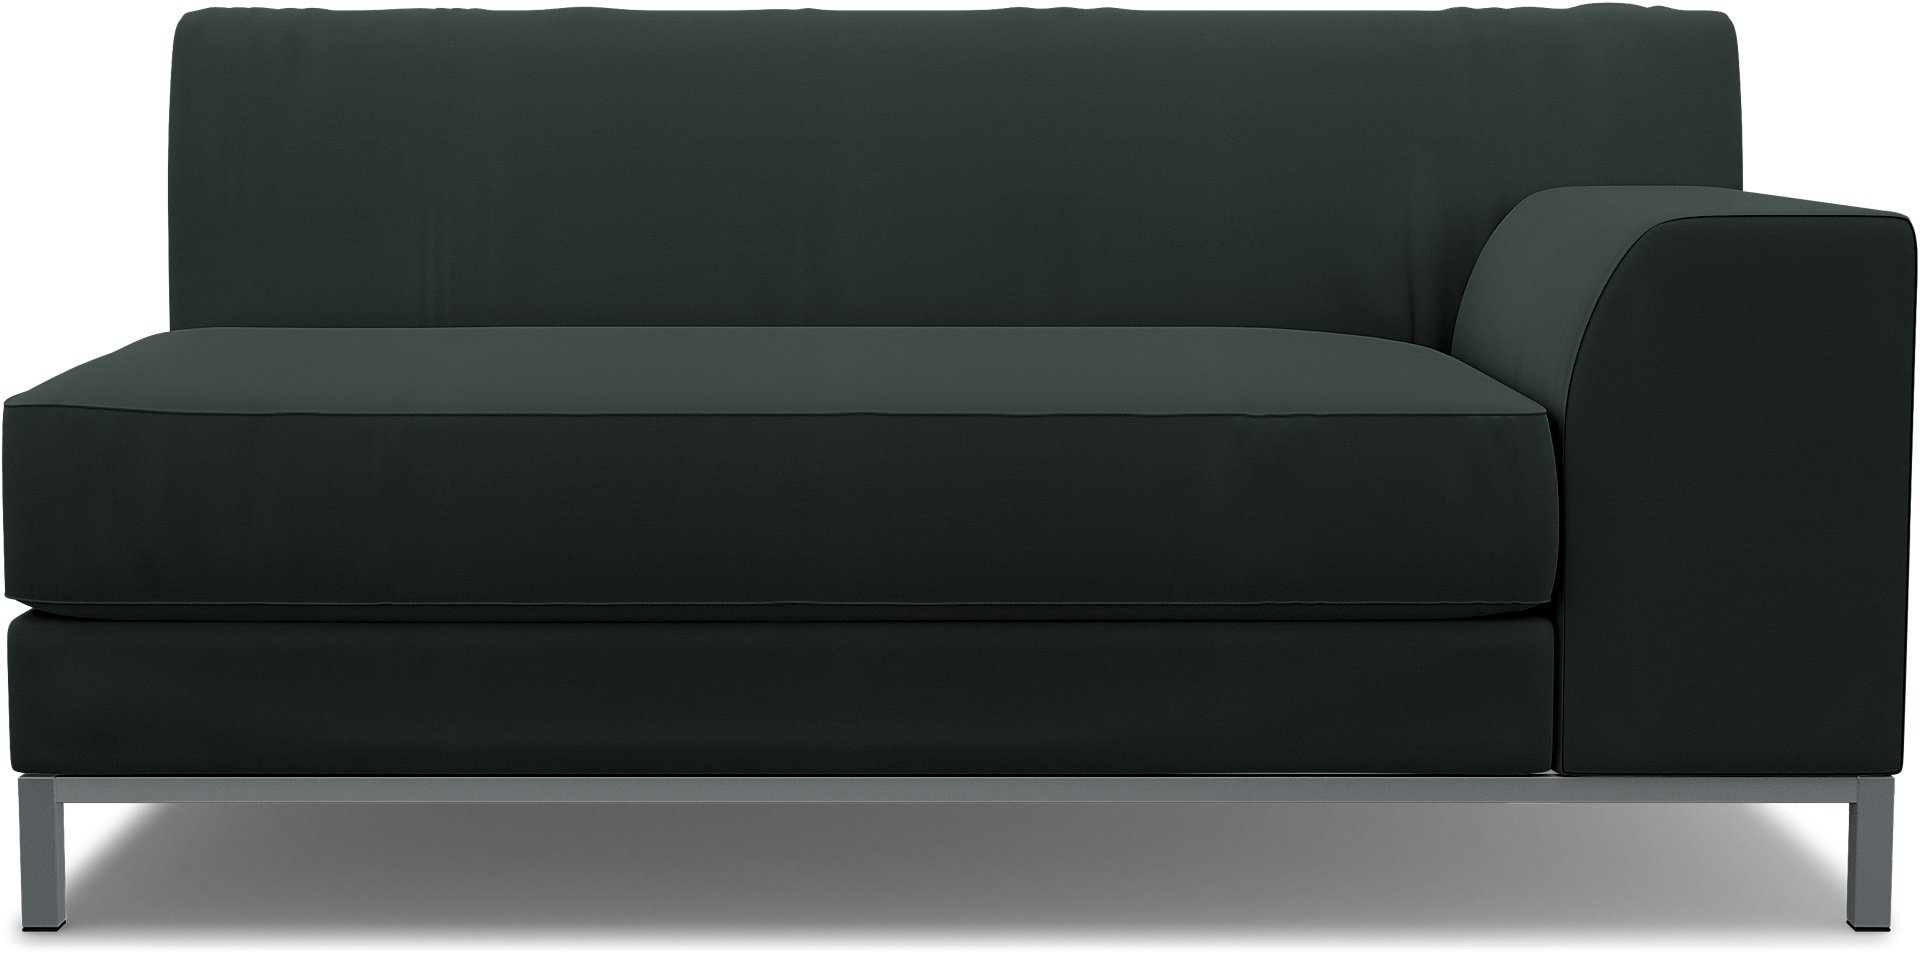 IKEA - Kramfors 2 Seater Sofa with Right Arm Cover, Graphite Grey, Cotton - Bemz